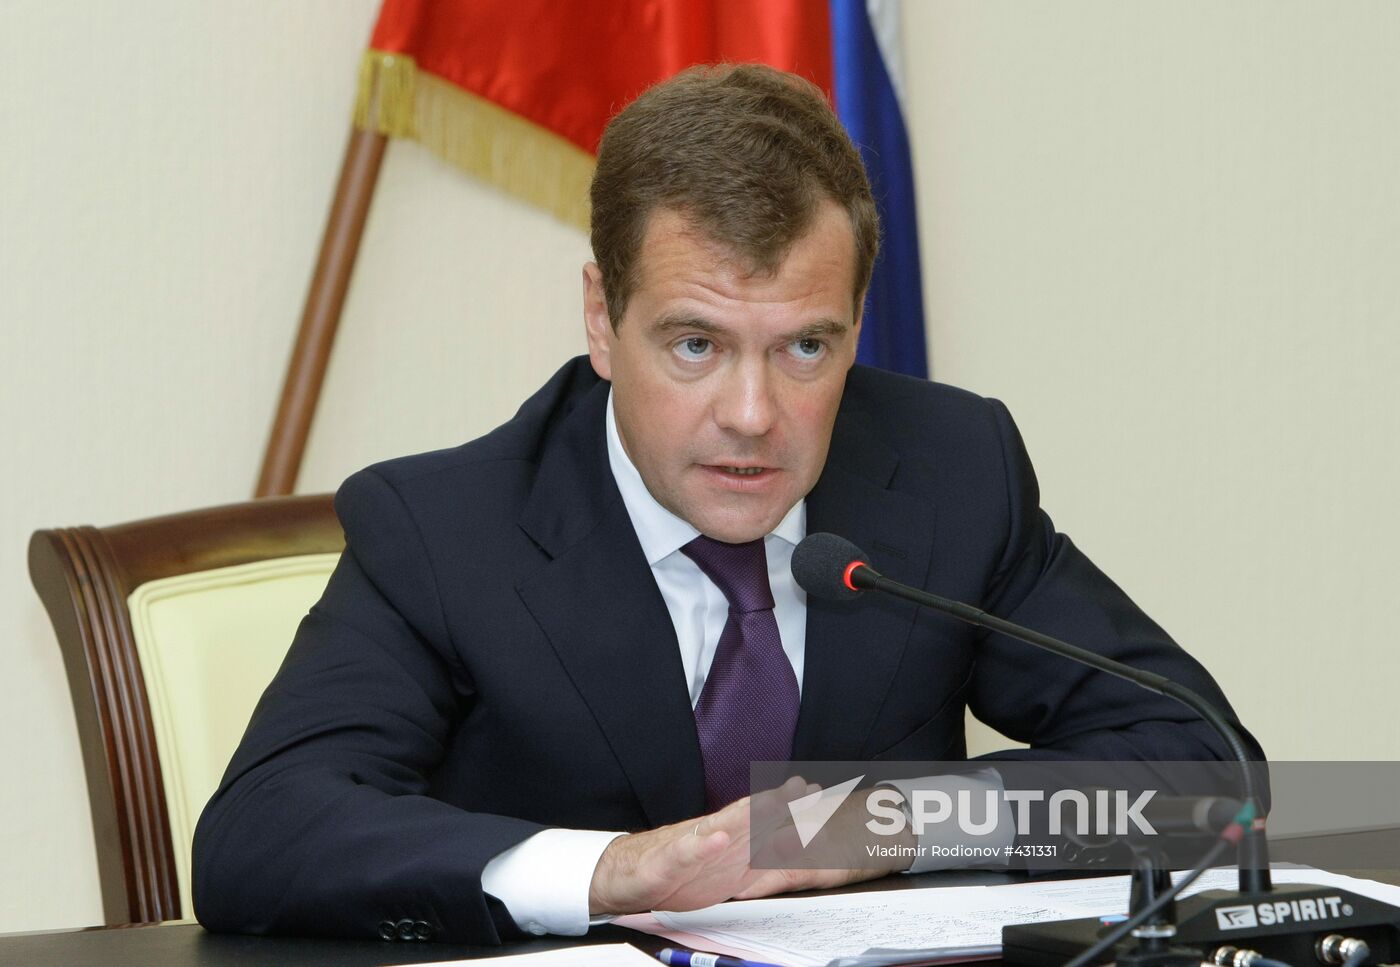 President Dmitry Medvedev conducts Security Council meeting